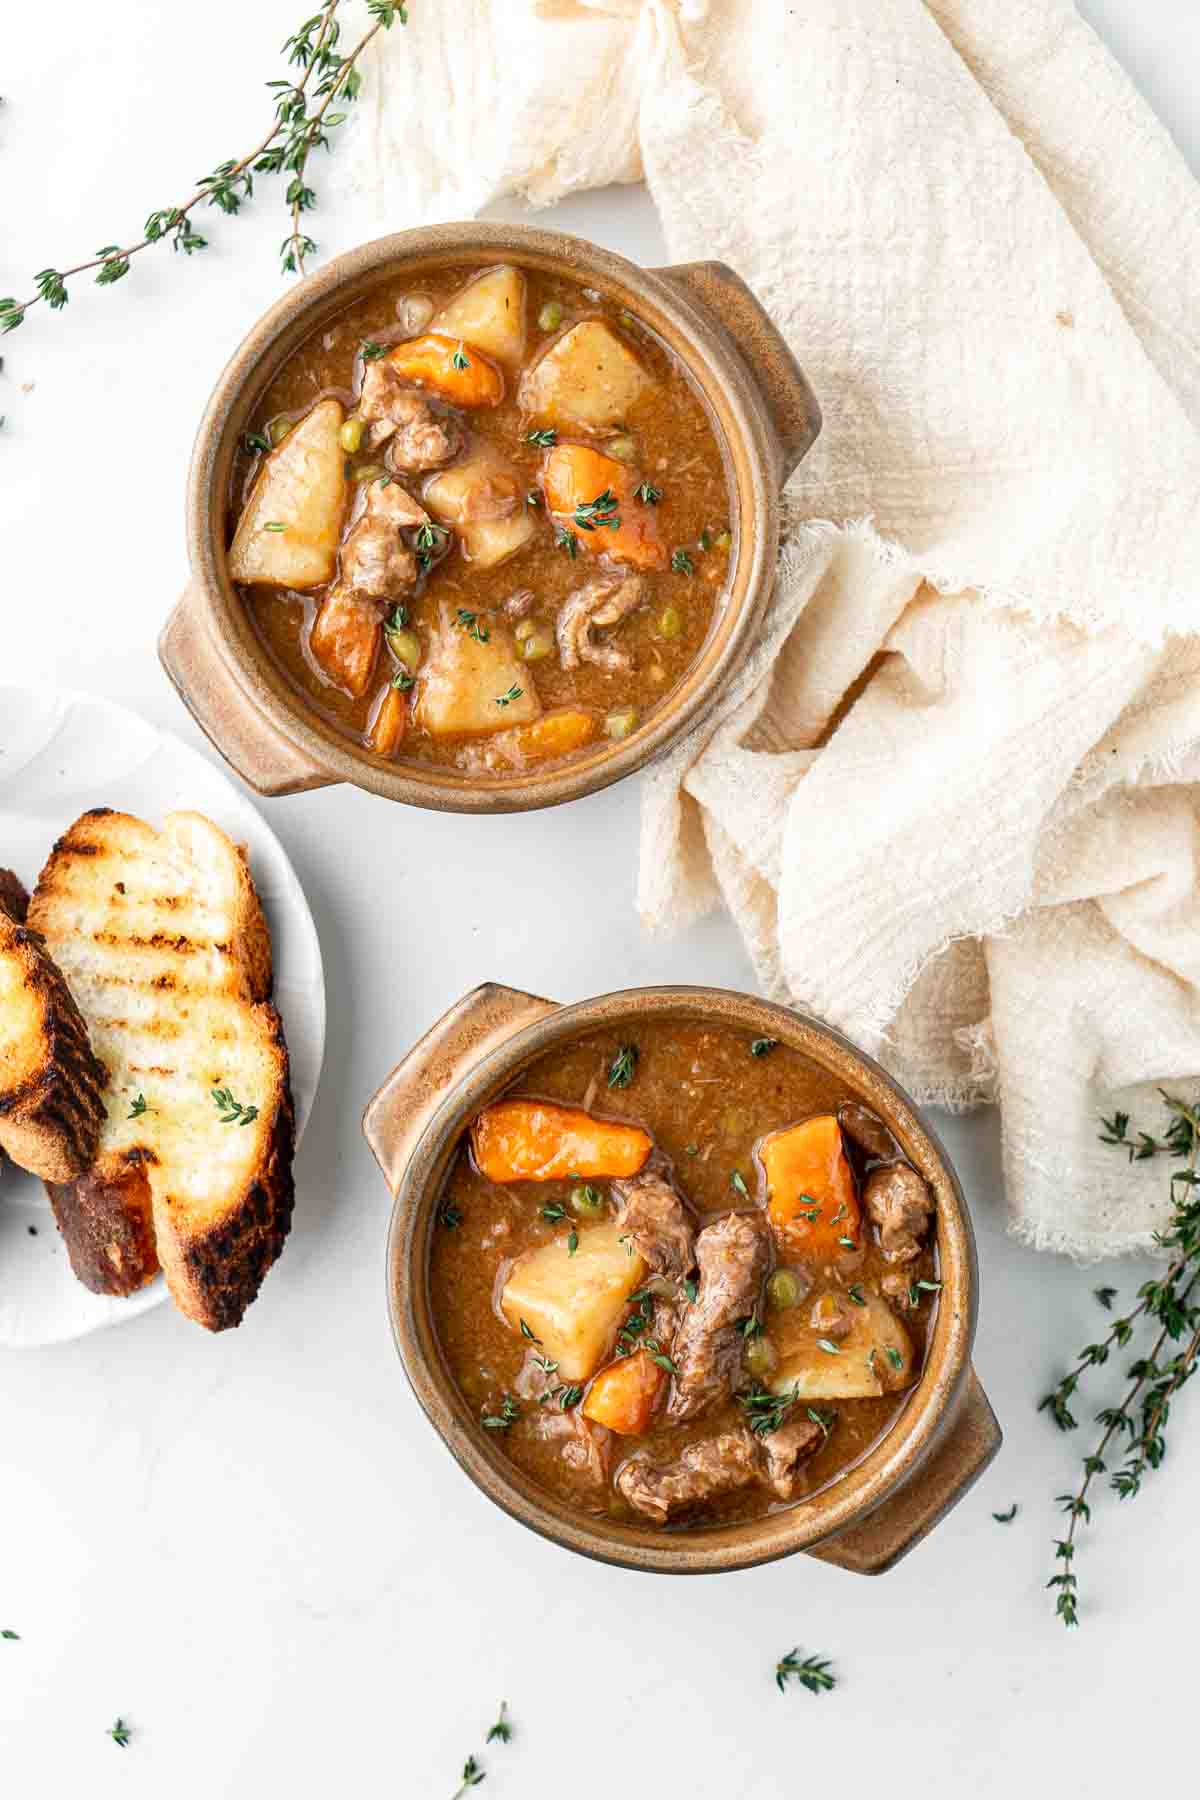 Beef stew served up in brown bowls with toasted bread.